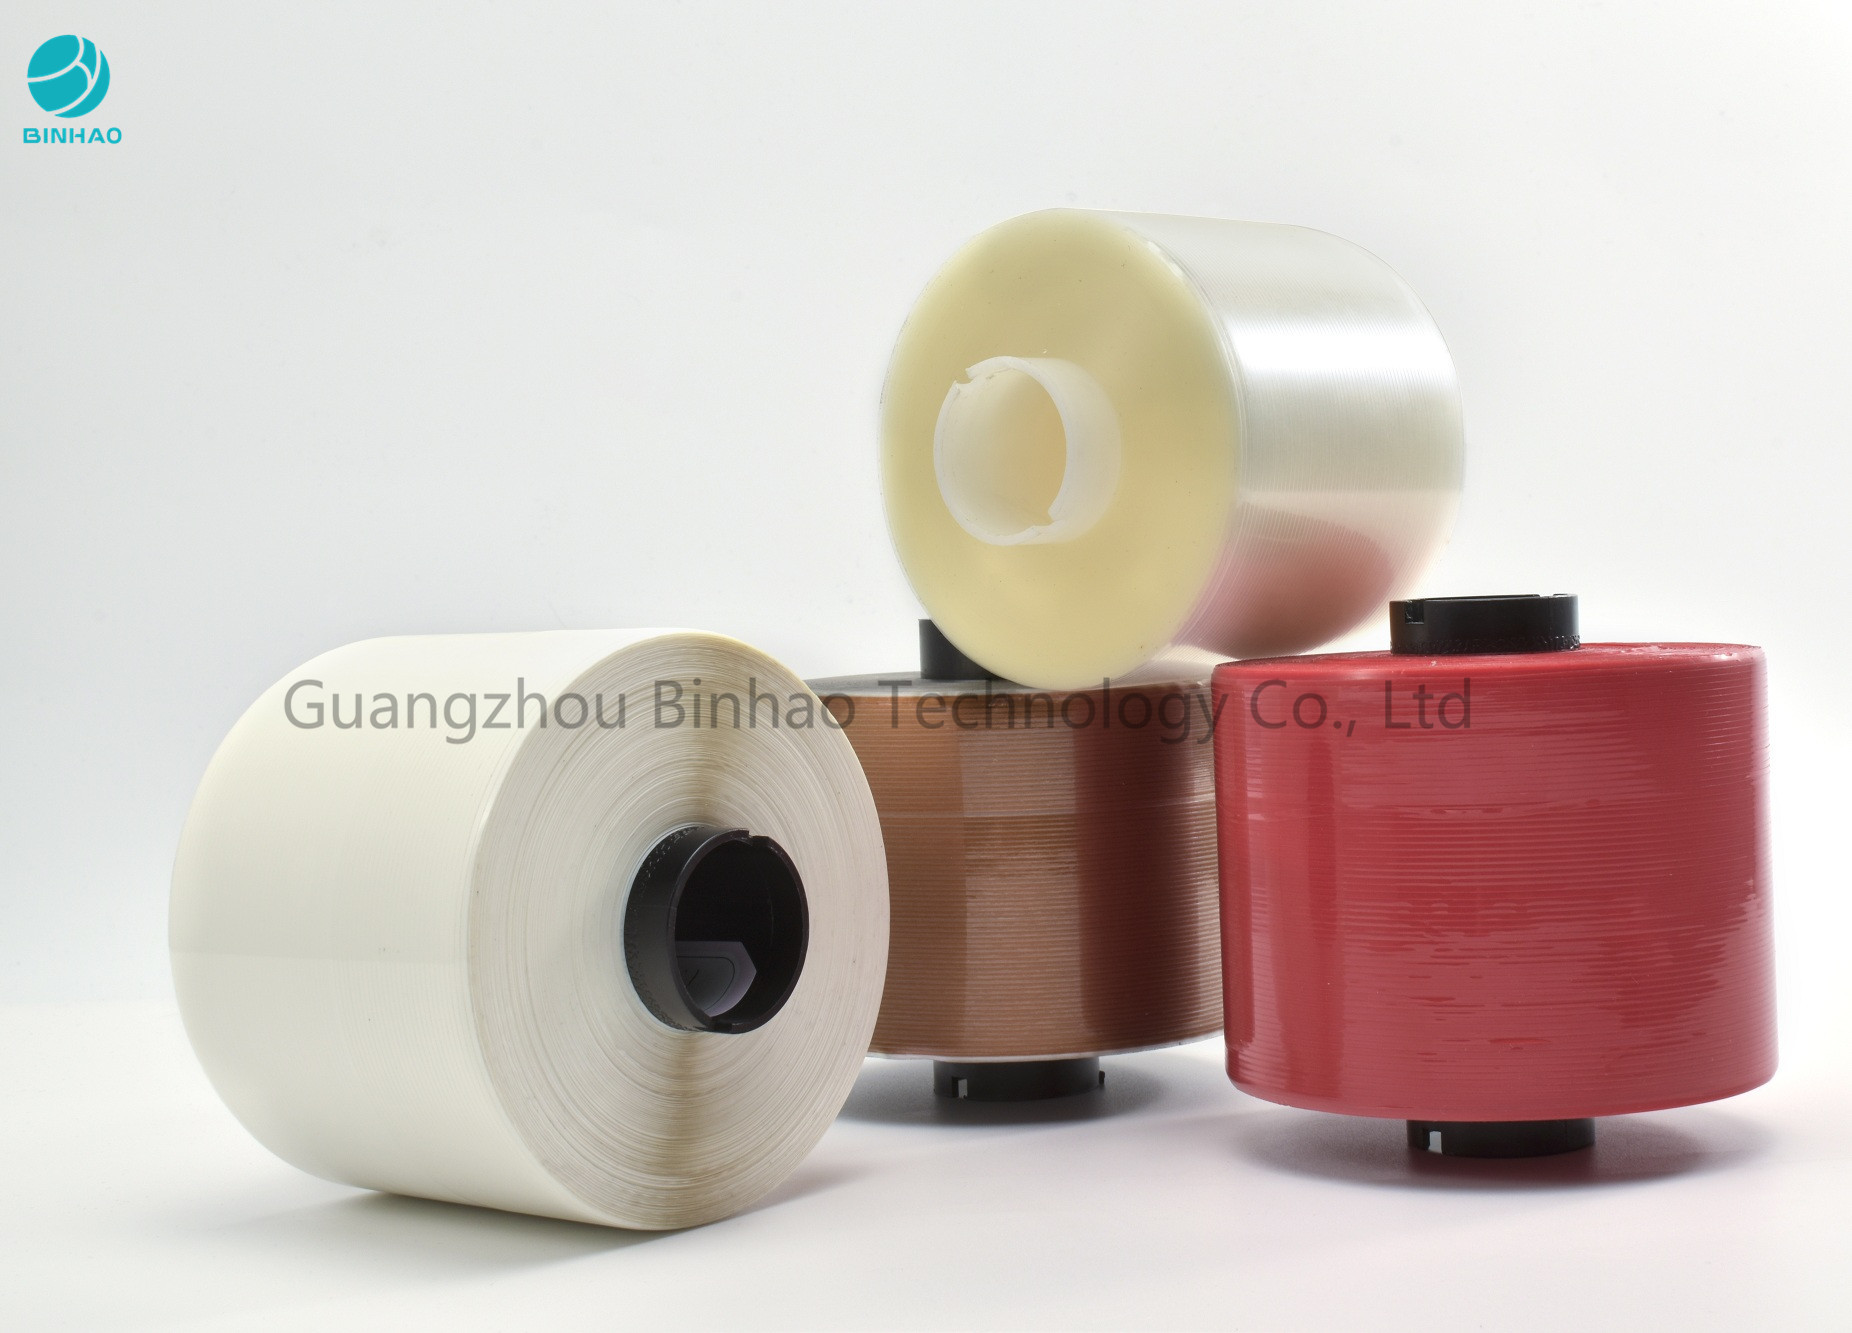 Customize Bobbin Cigarette / Tobacco Tear Tape For Sealing And Opening Packaging Film In 40micron BOPP